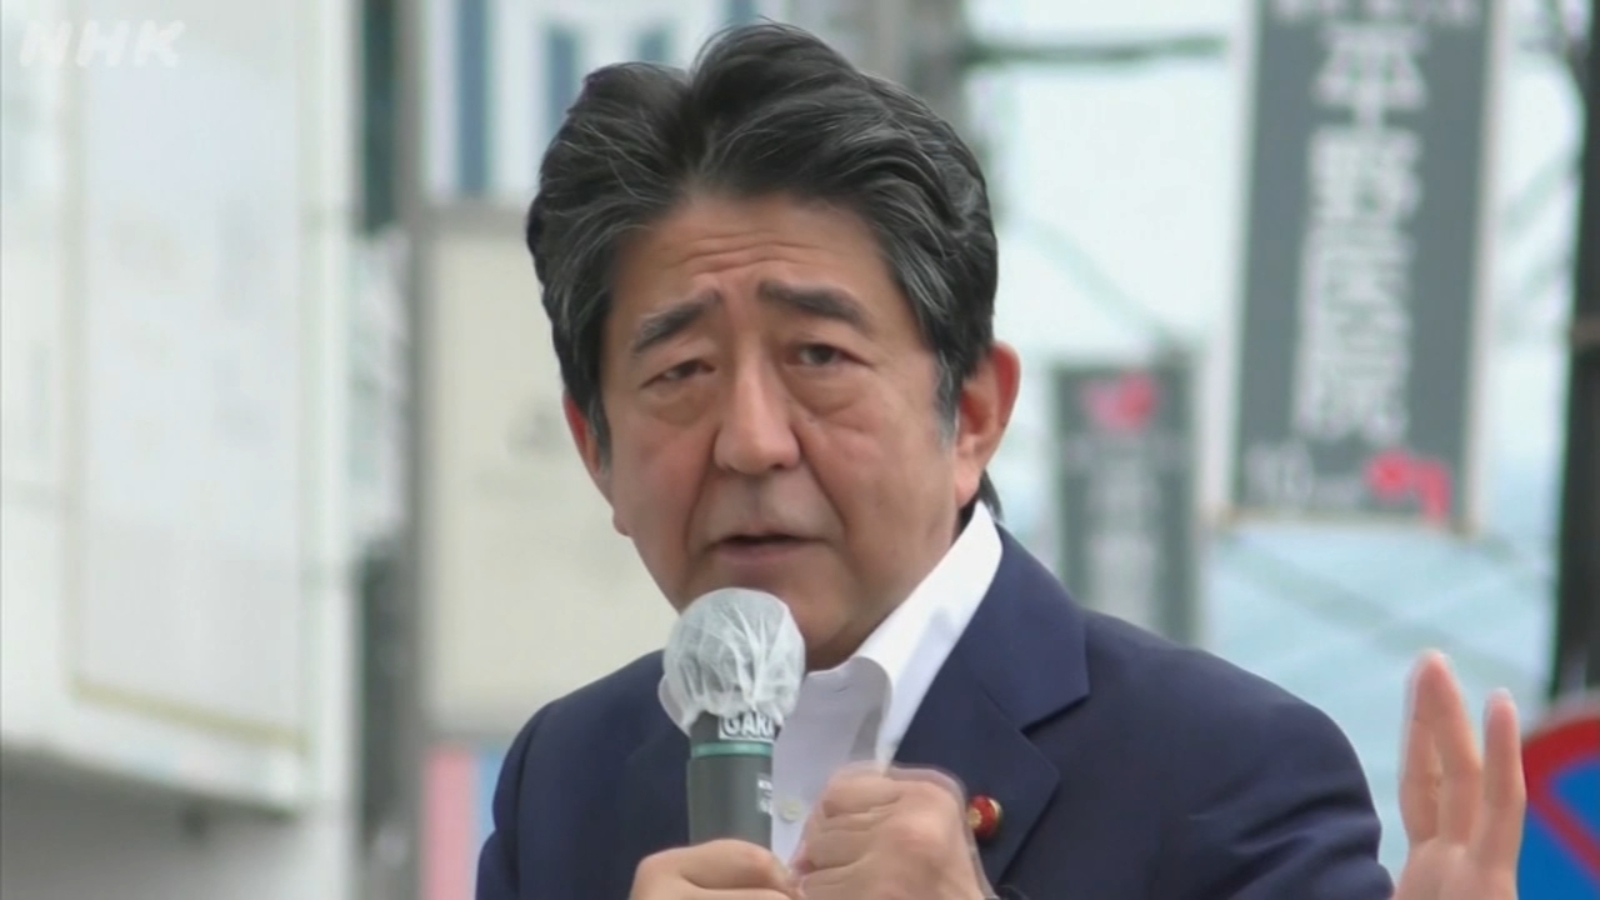 Former Japanese Prime Minister Shinzo Abe fatally shot during campaign speech